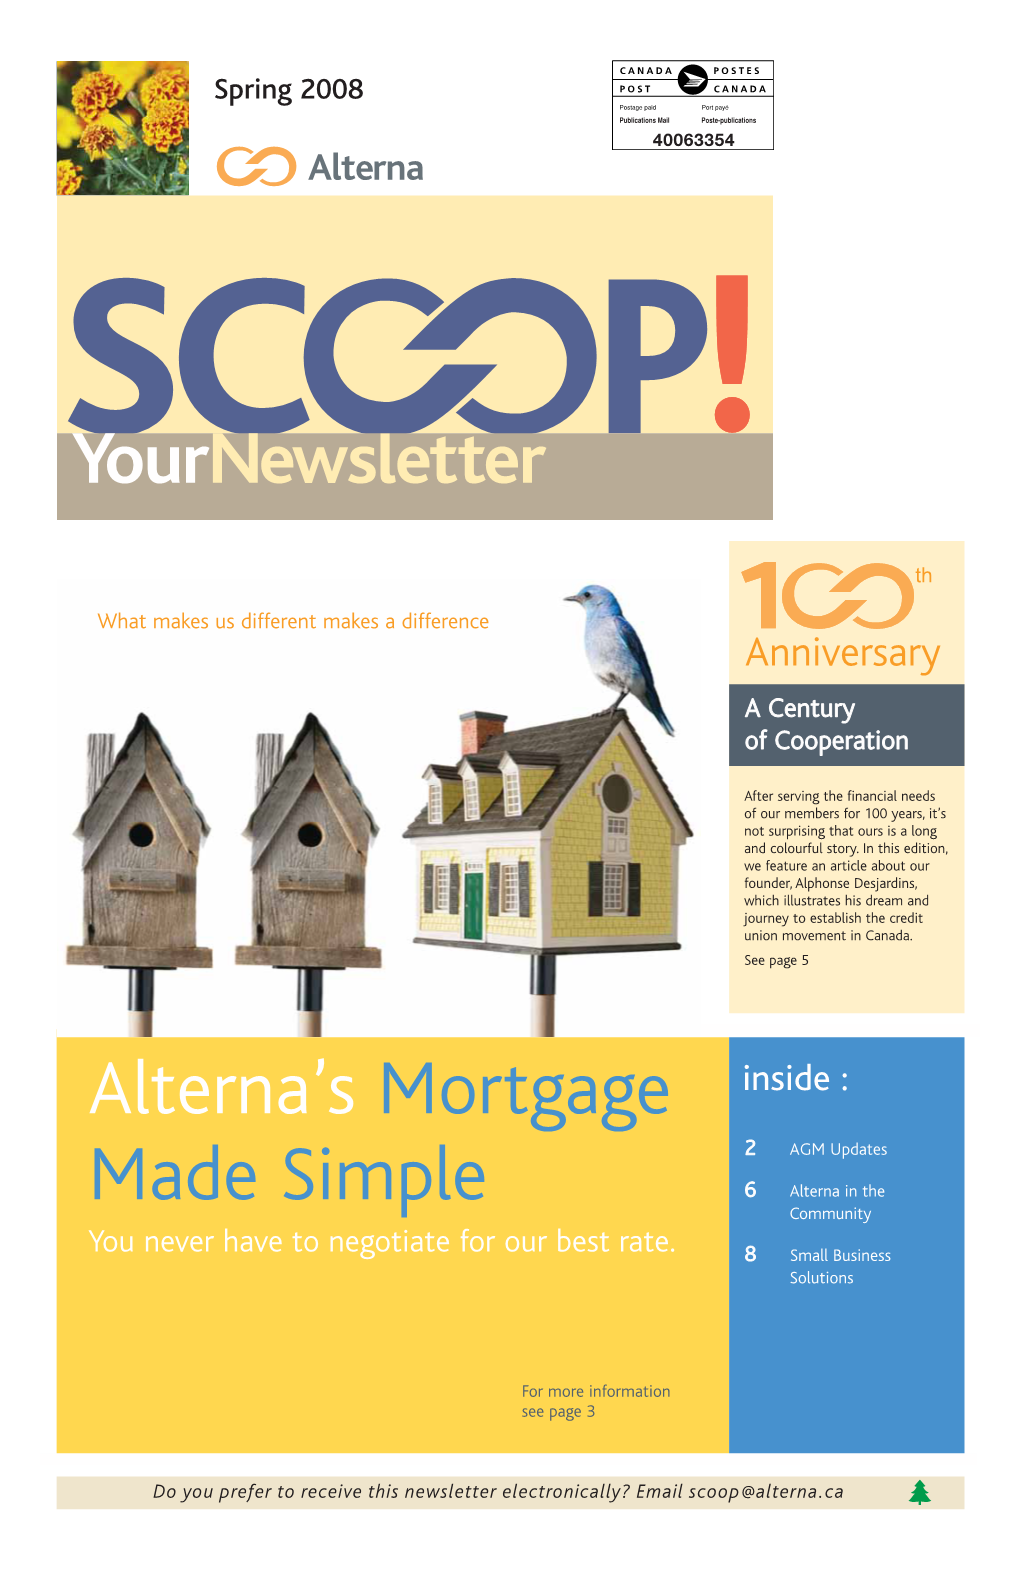 Alterna's Mortgage Made Simple